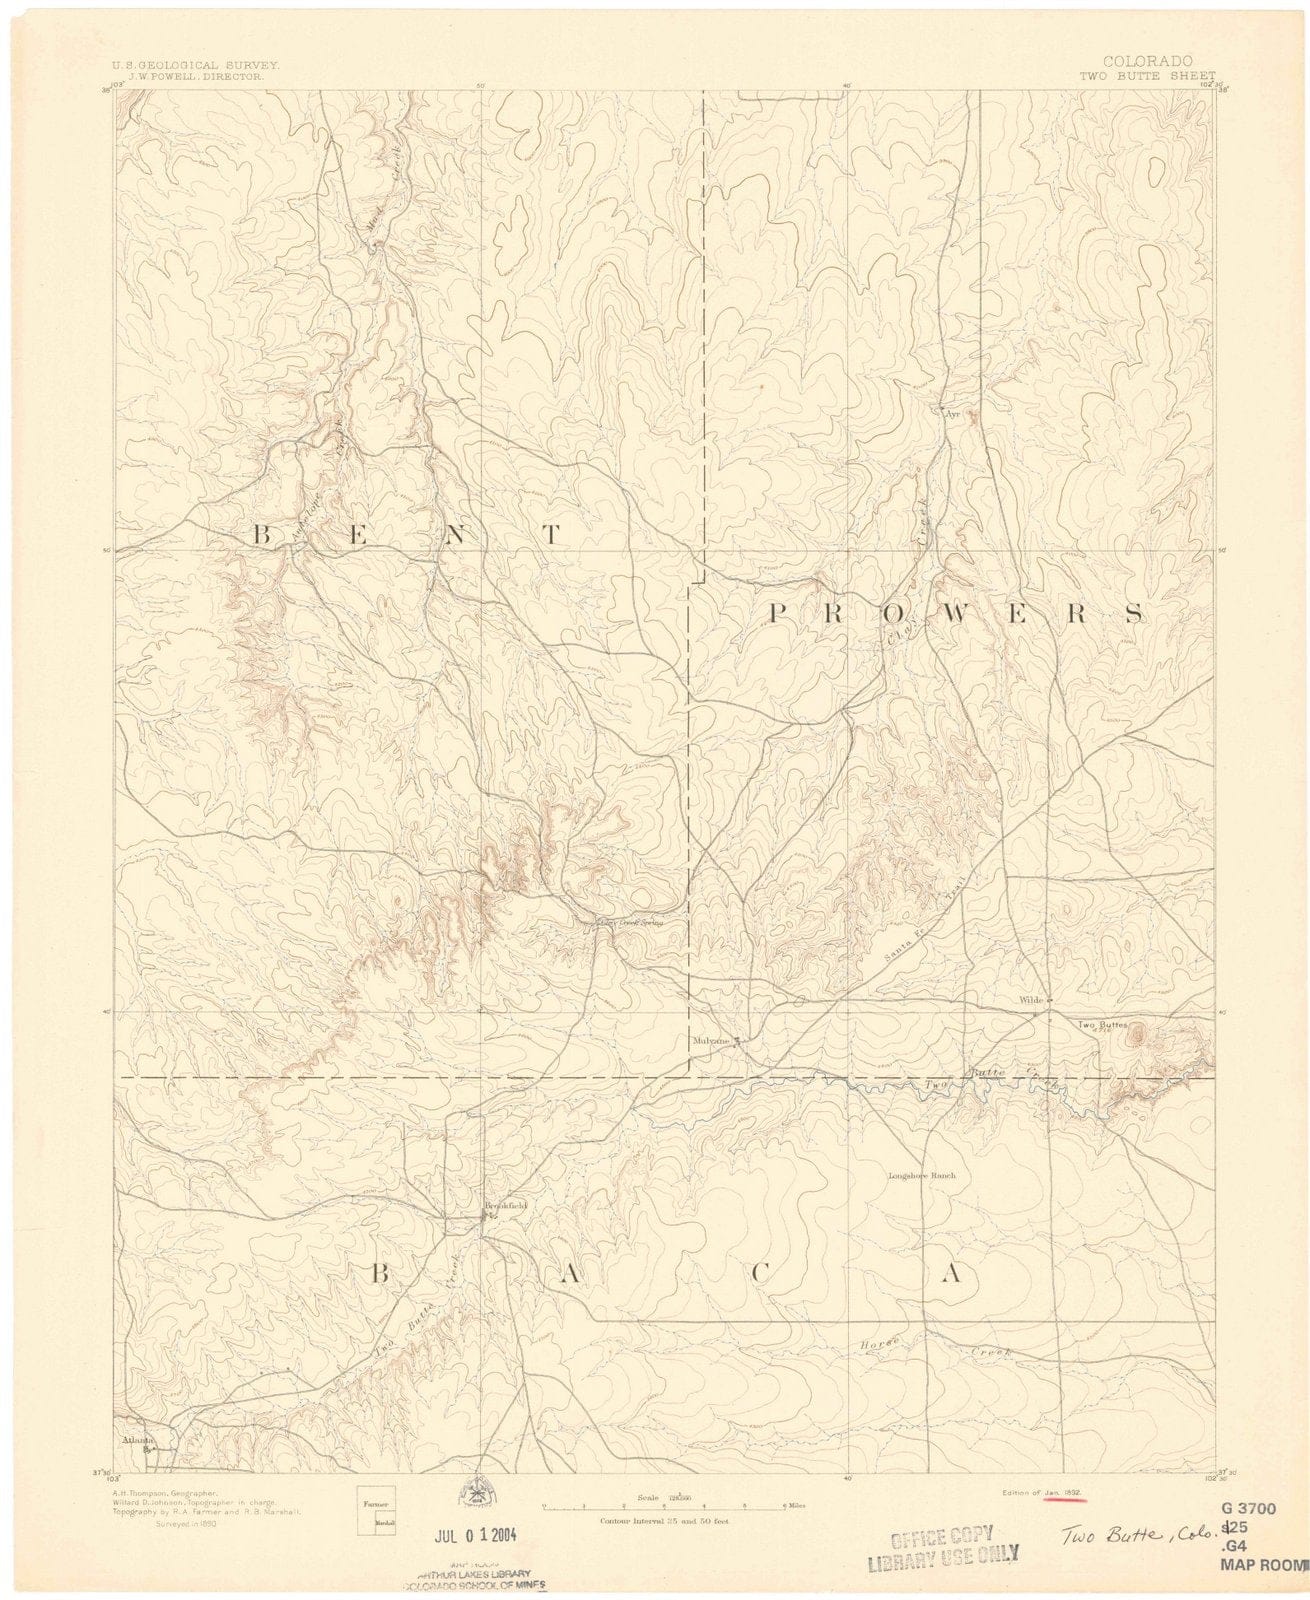 1892 Two Butte, CO - Colorado - USGS Topographic Map